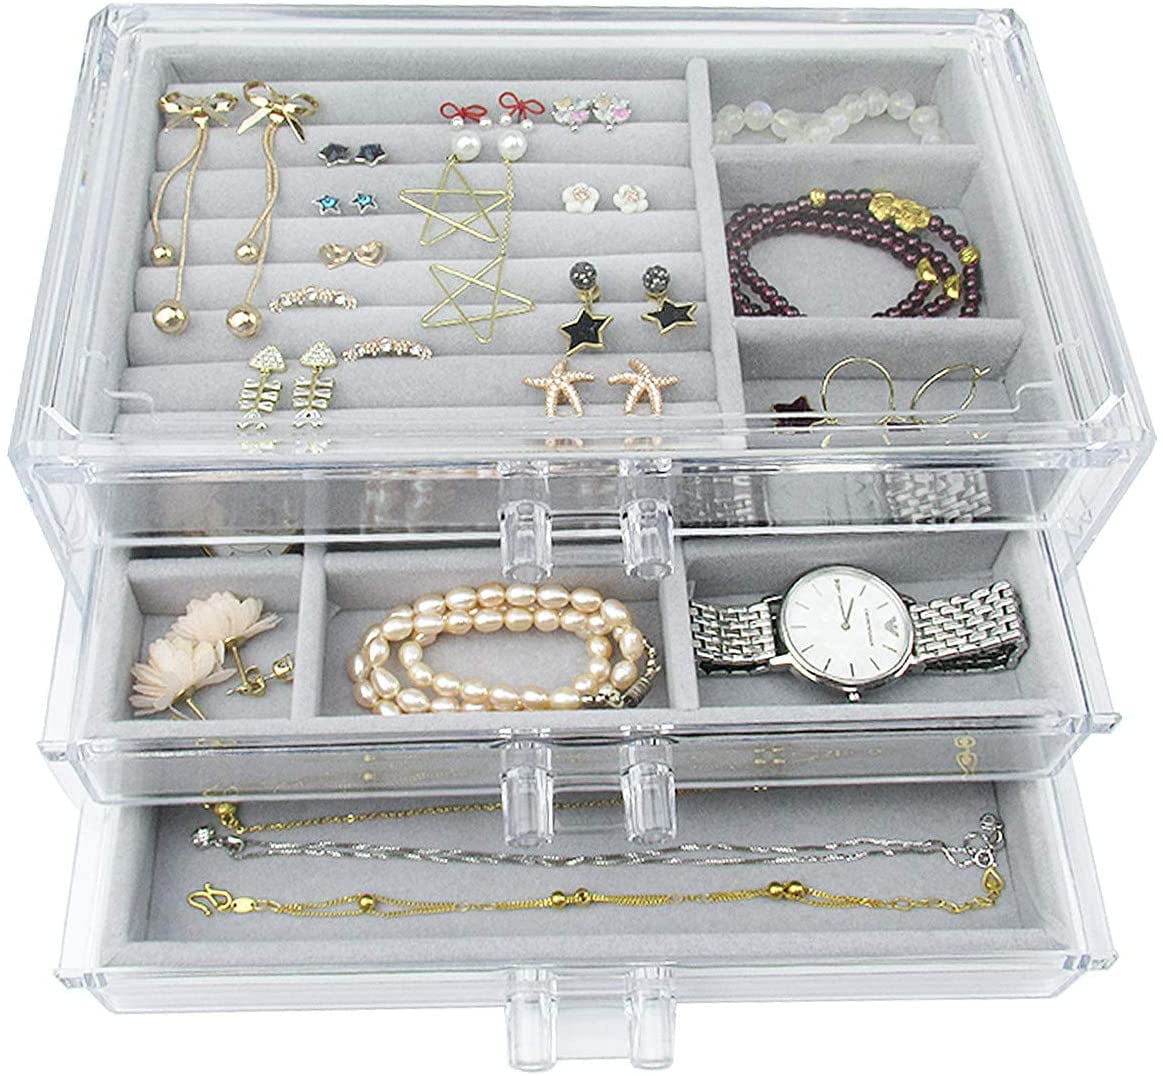 With Base Gifts Necklace Holder Jewelry Suspended Display Stand Holder Case Box 